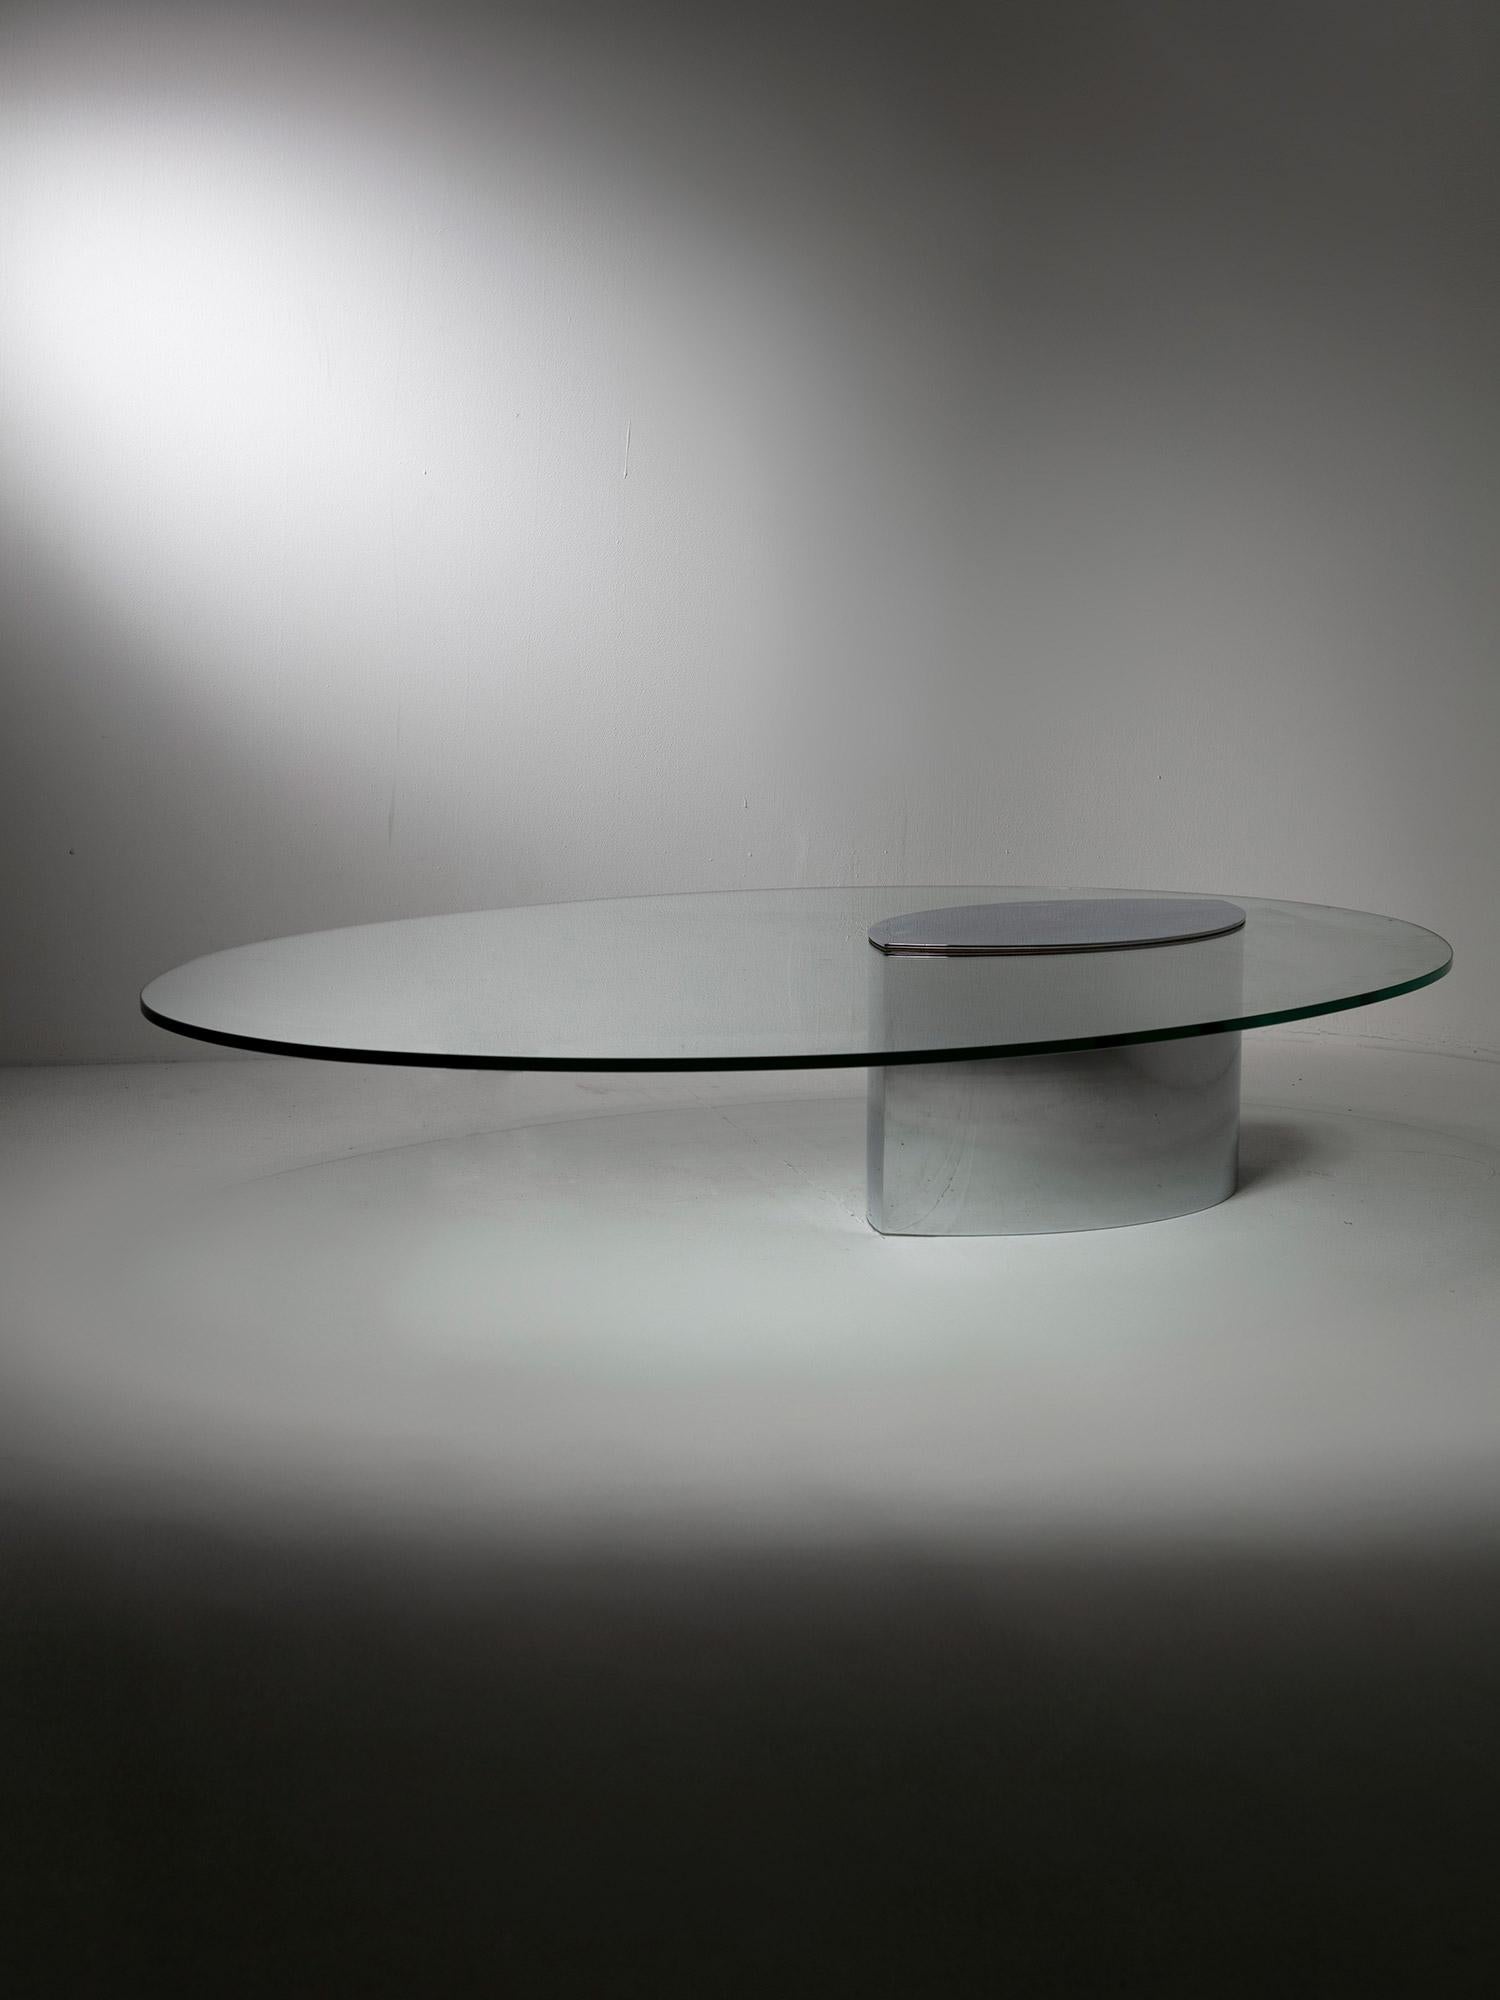 Iconic Lunario low table by Cini Boeri for Gavina.
Polished chrome-plated brass base supports a large oval glass surface.
One of the first examples of tables featuring a cantilevered top, with its heavy counterweight base.
The piece silently